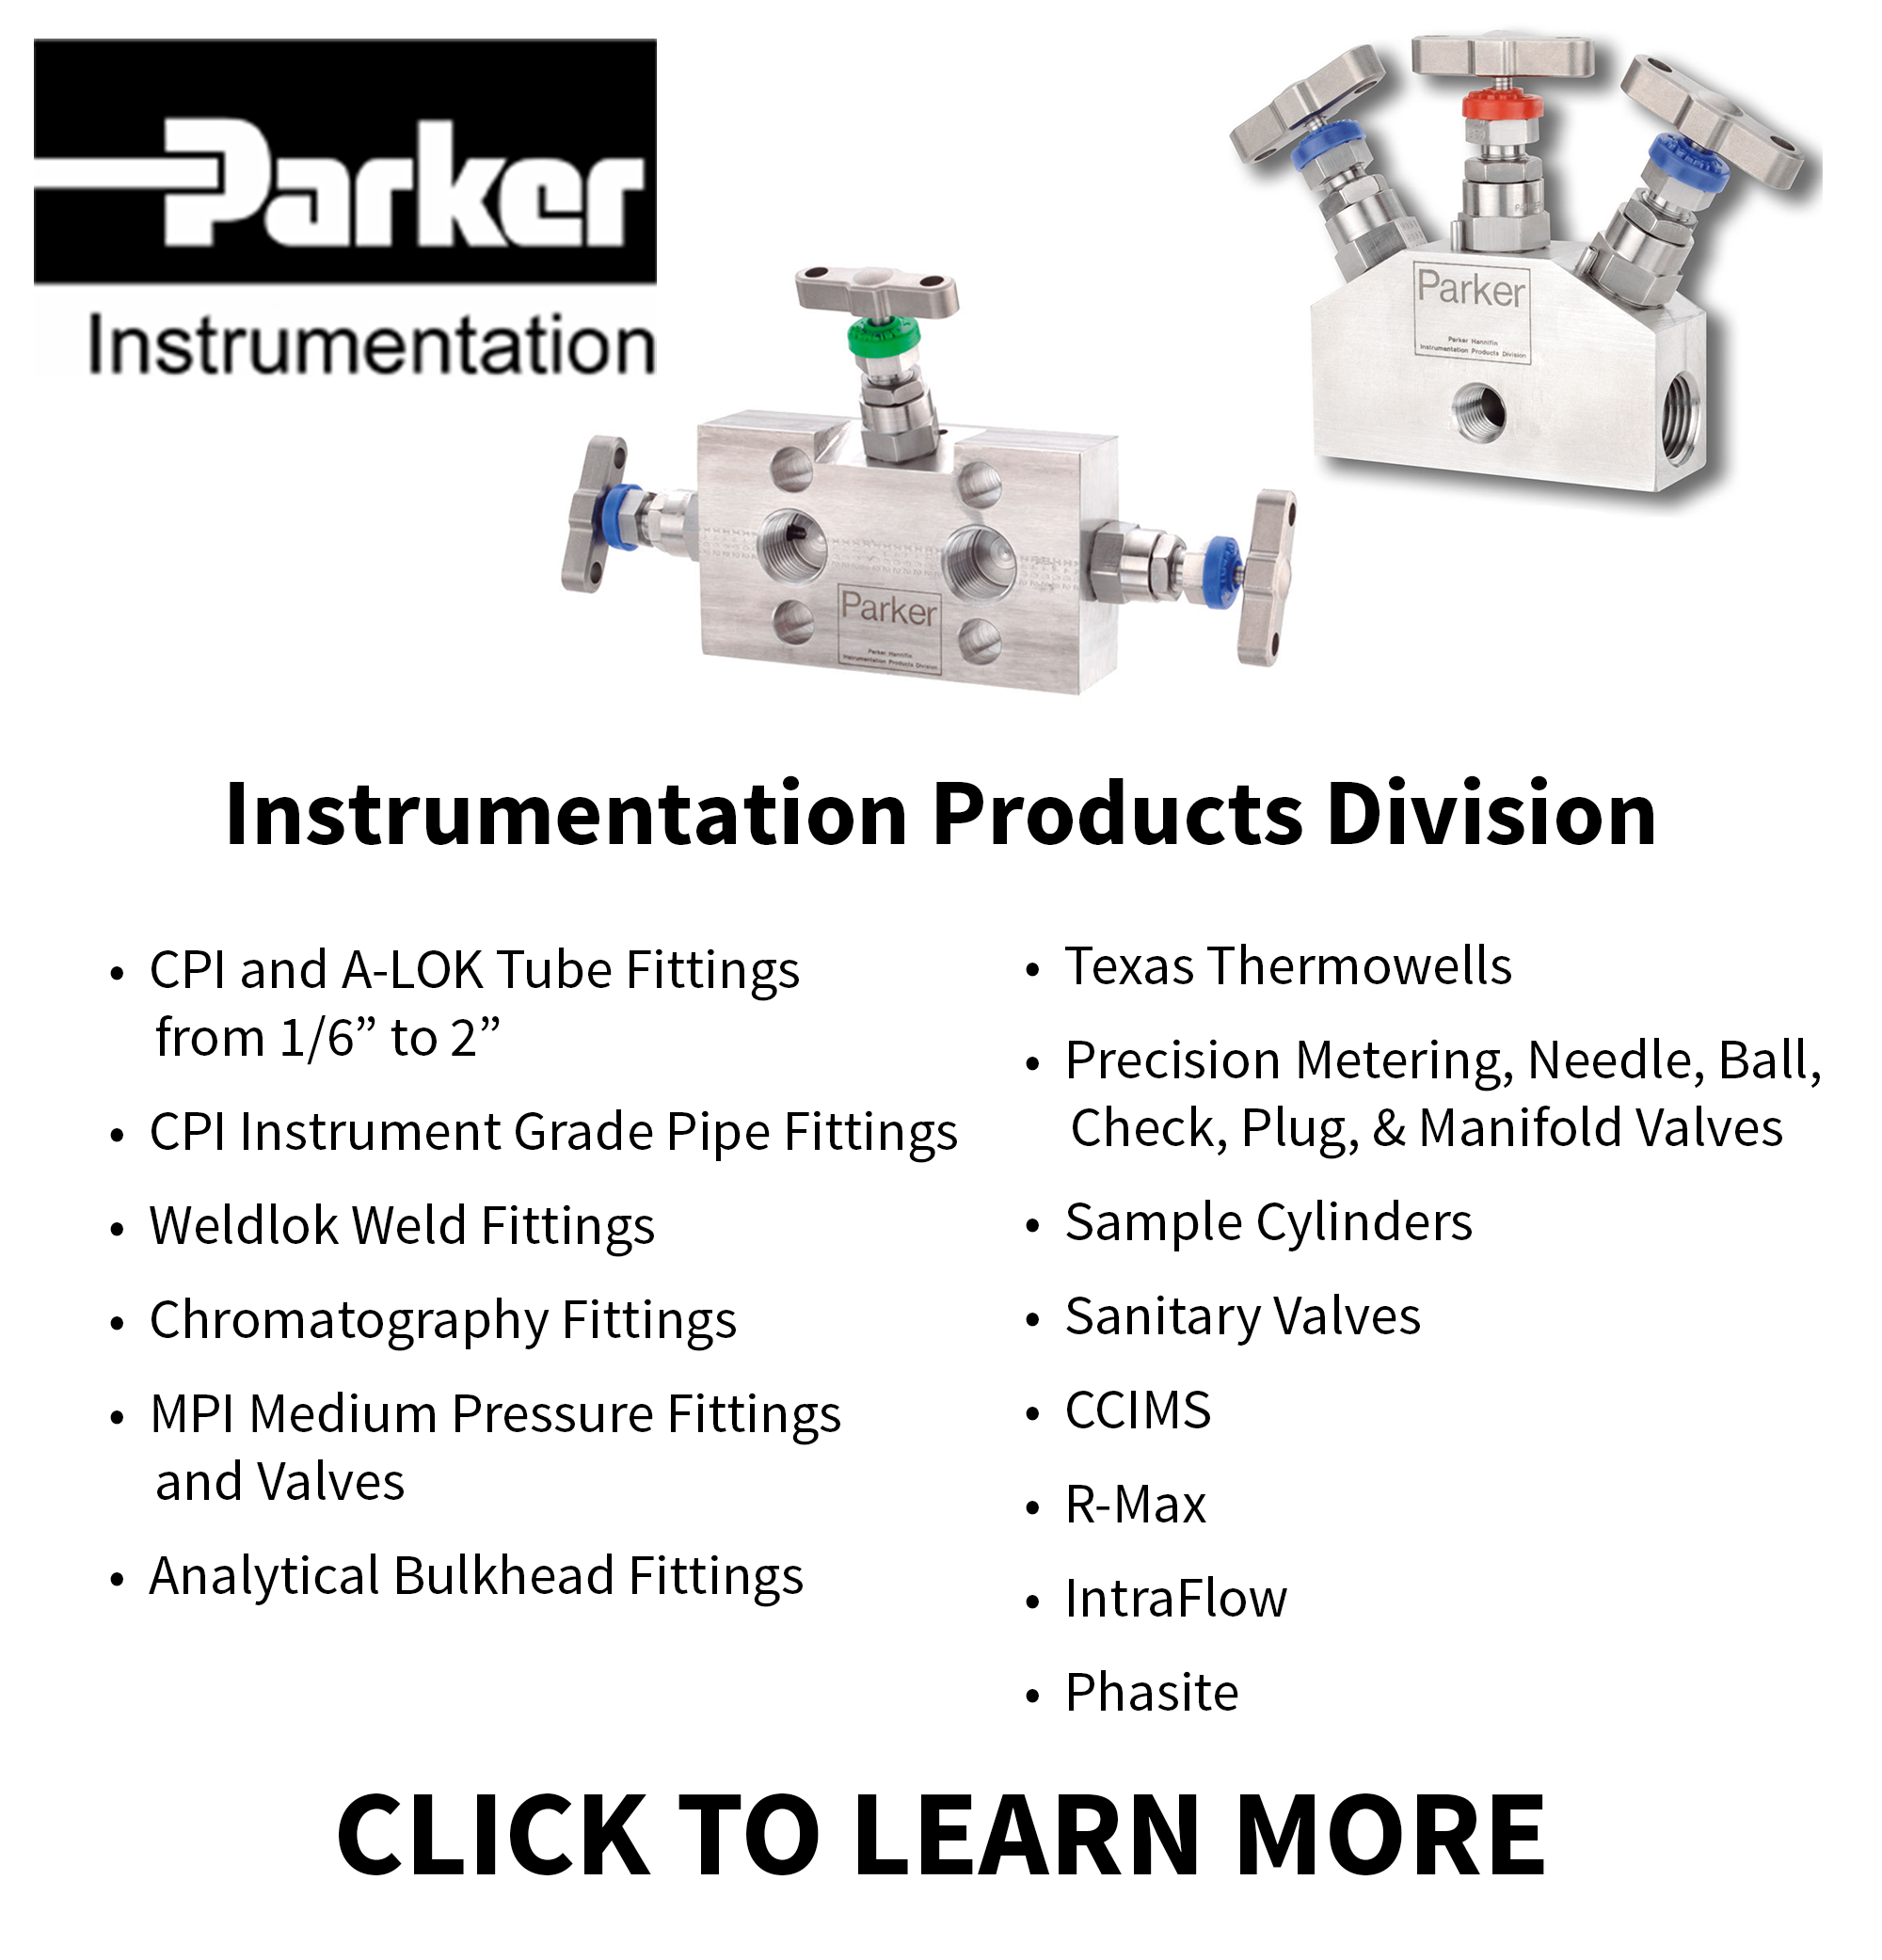 Ohio Valley Industrial Services- Parker Instrumentation Products Division